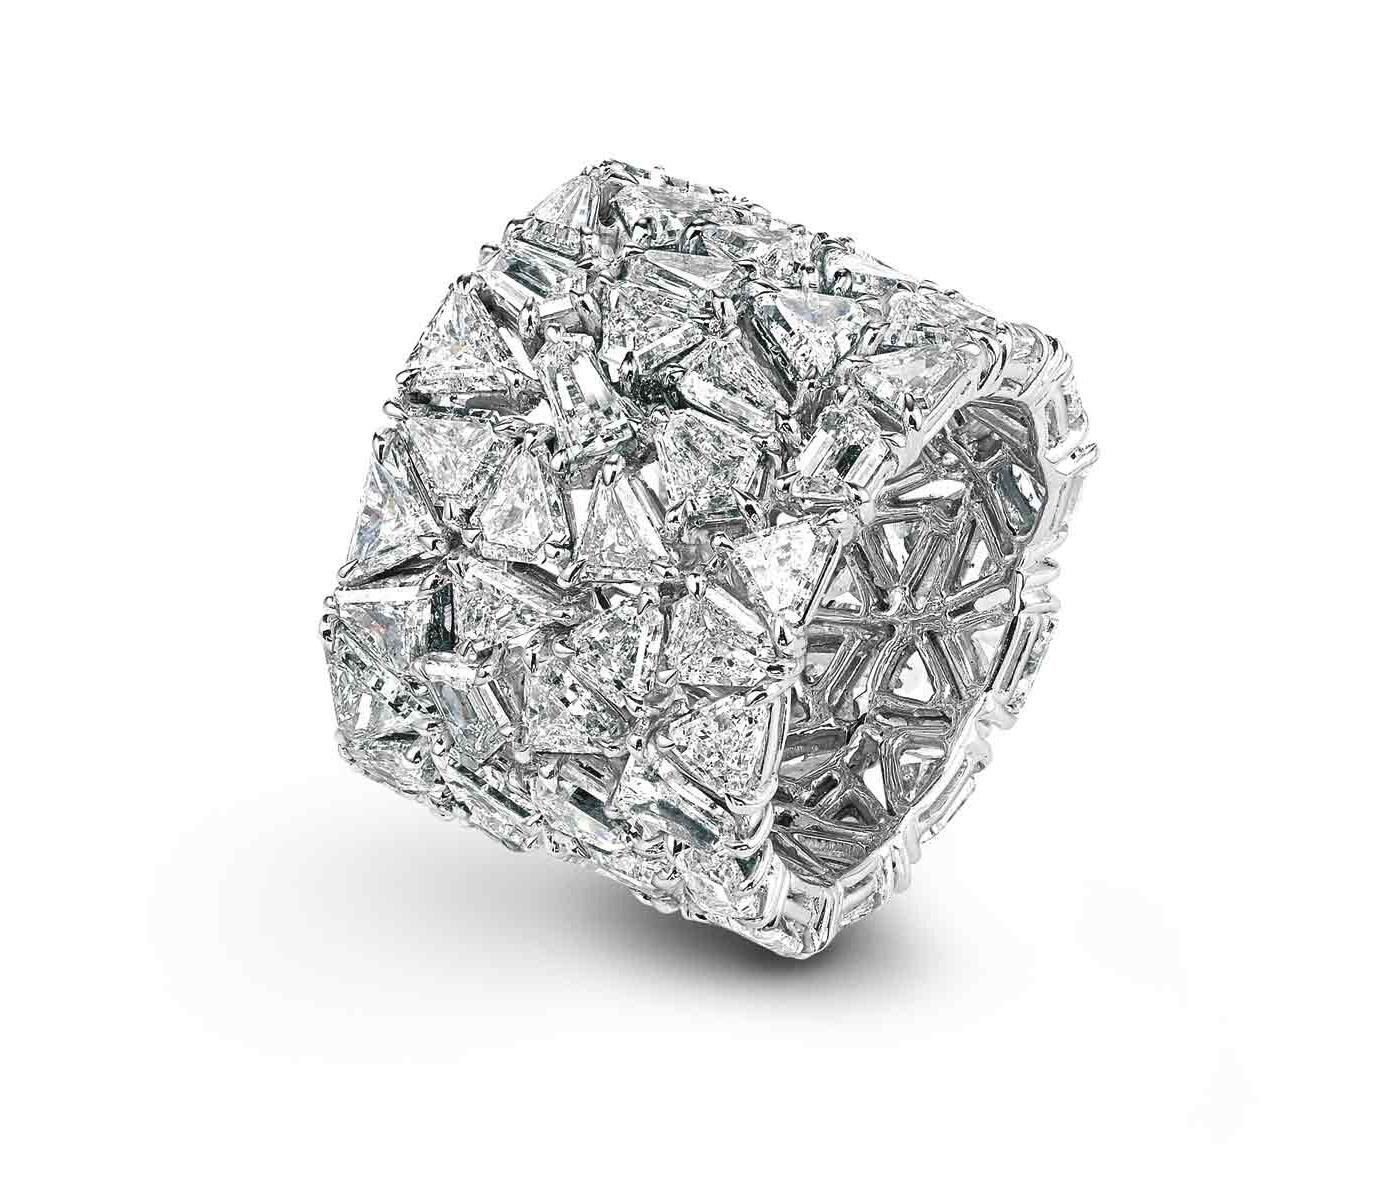 Ring by Chopard